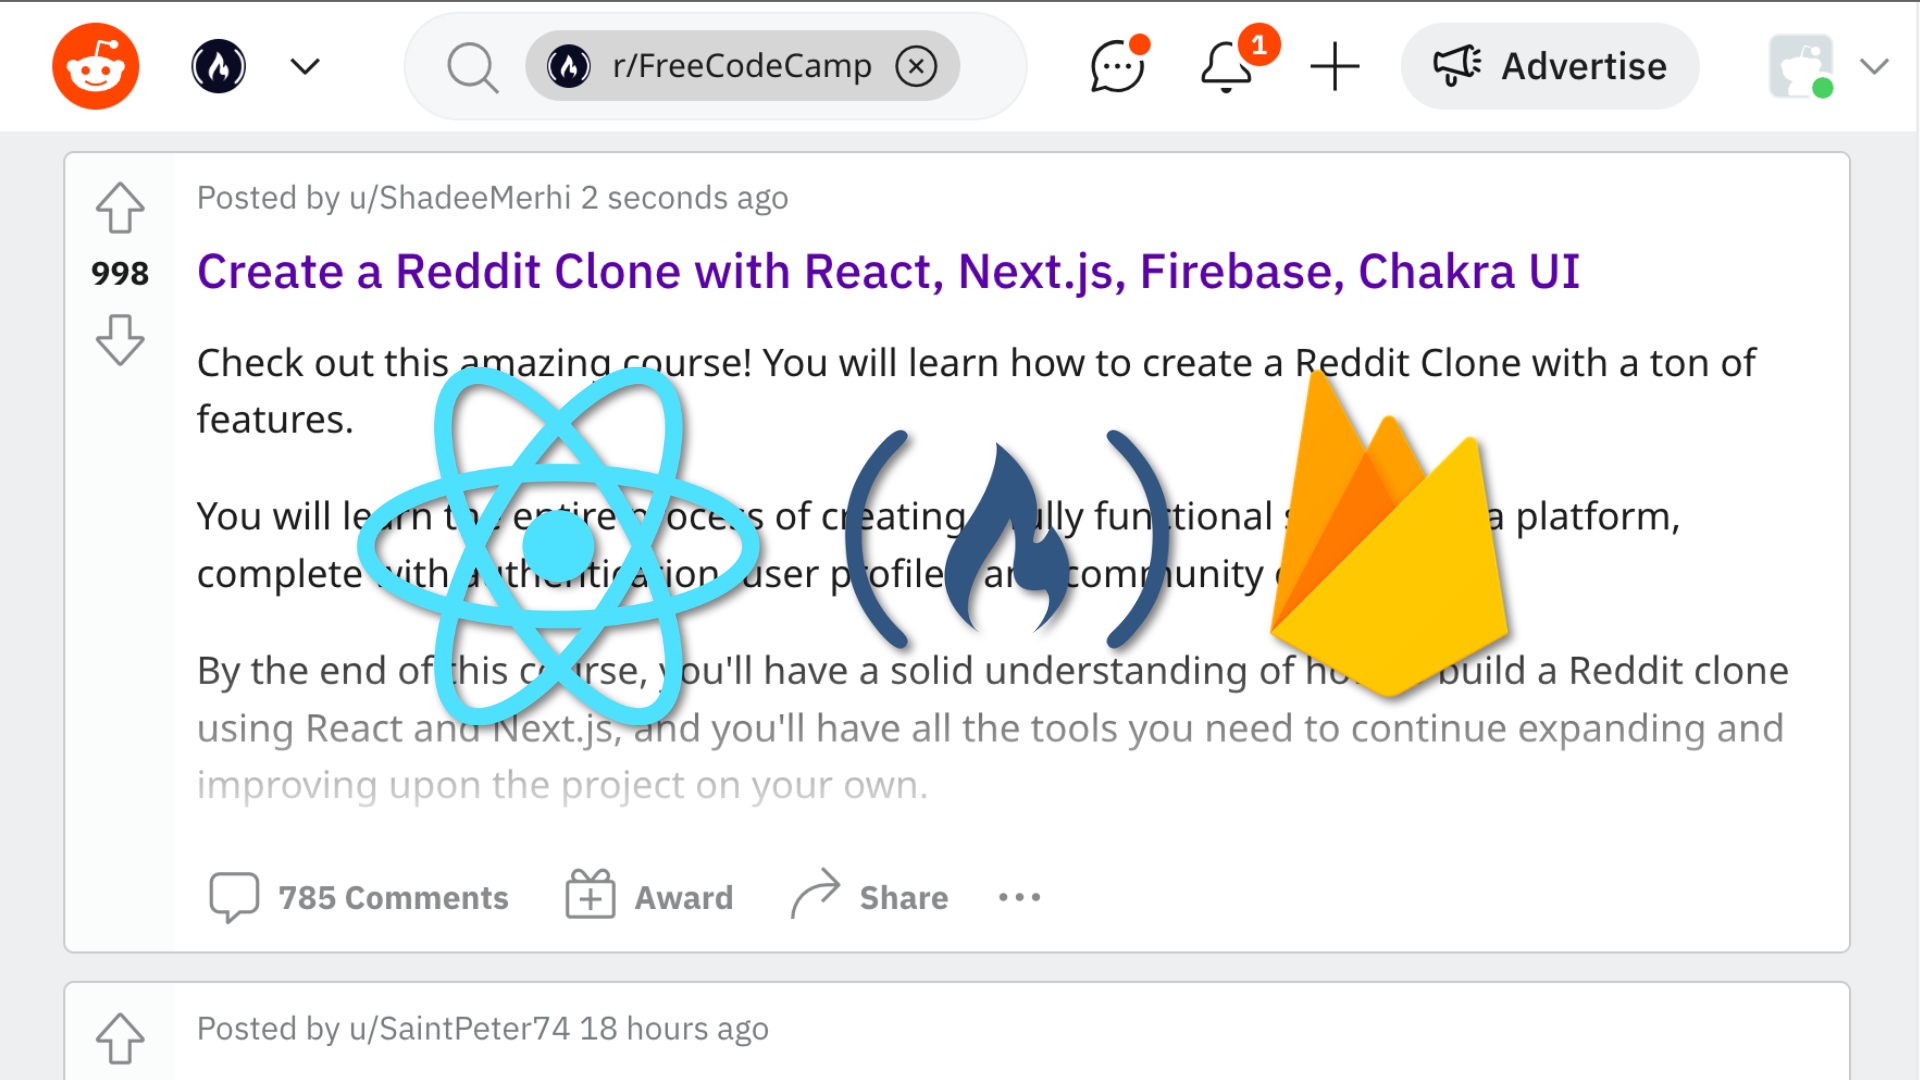 Code a Reddit Clone with React and Firebase